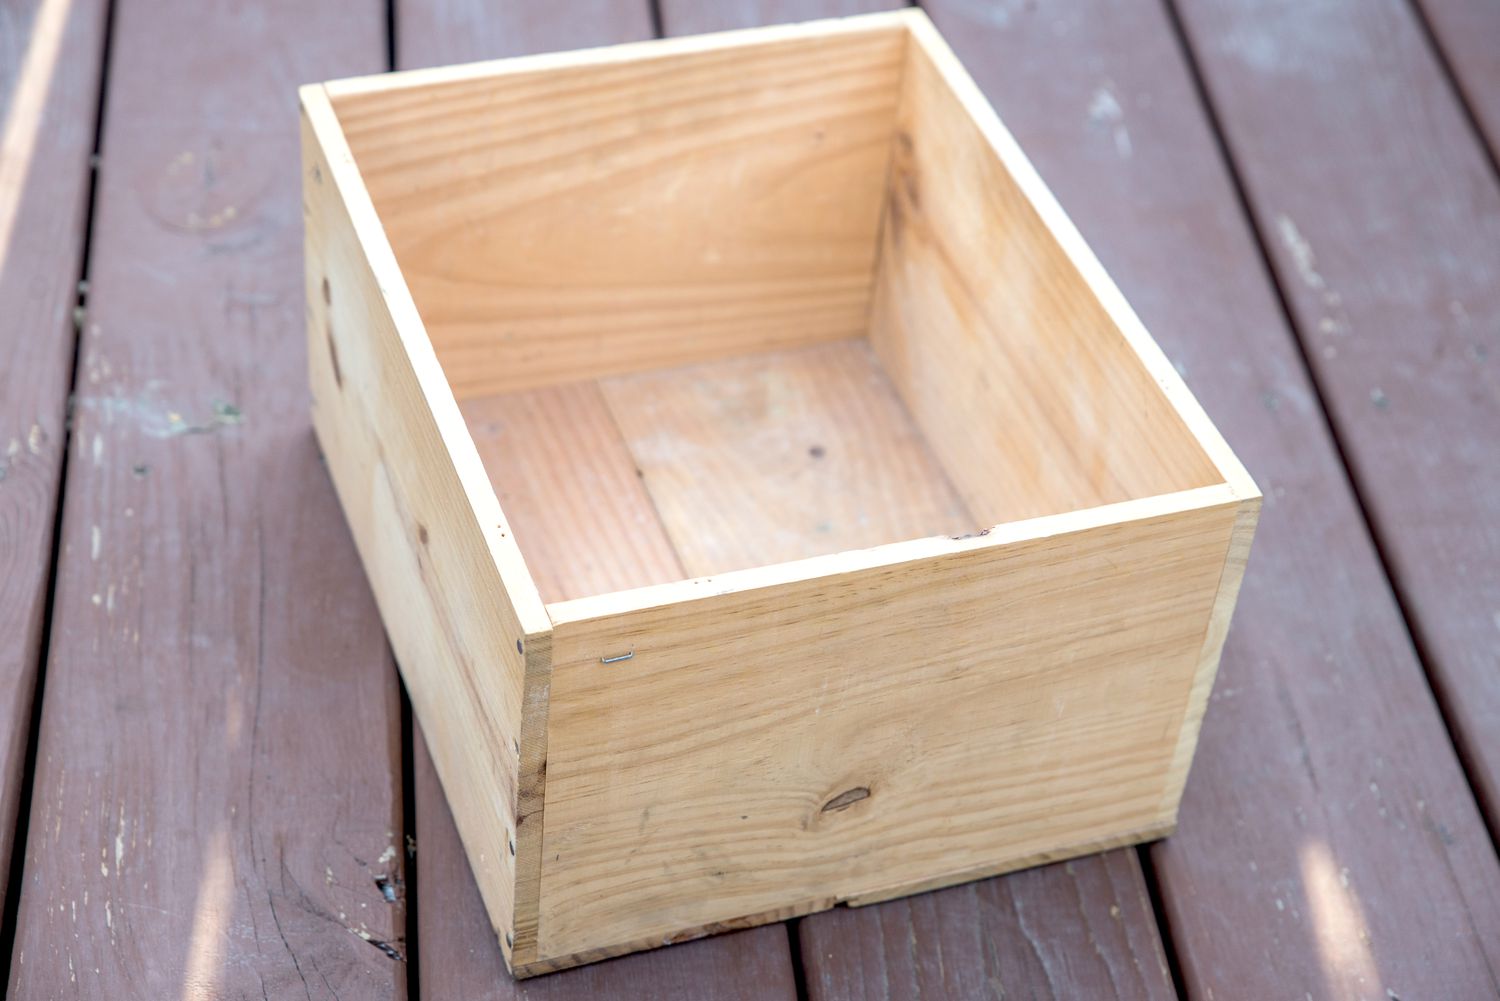 wood container to use for a planter